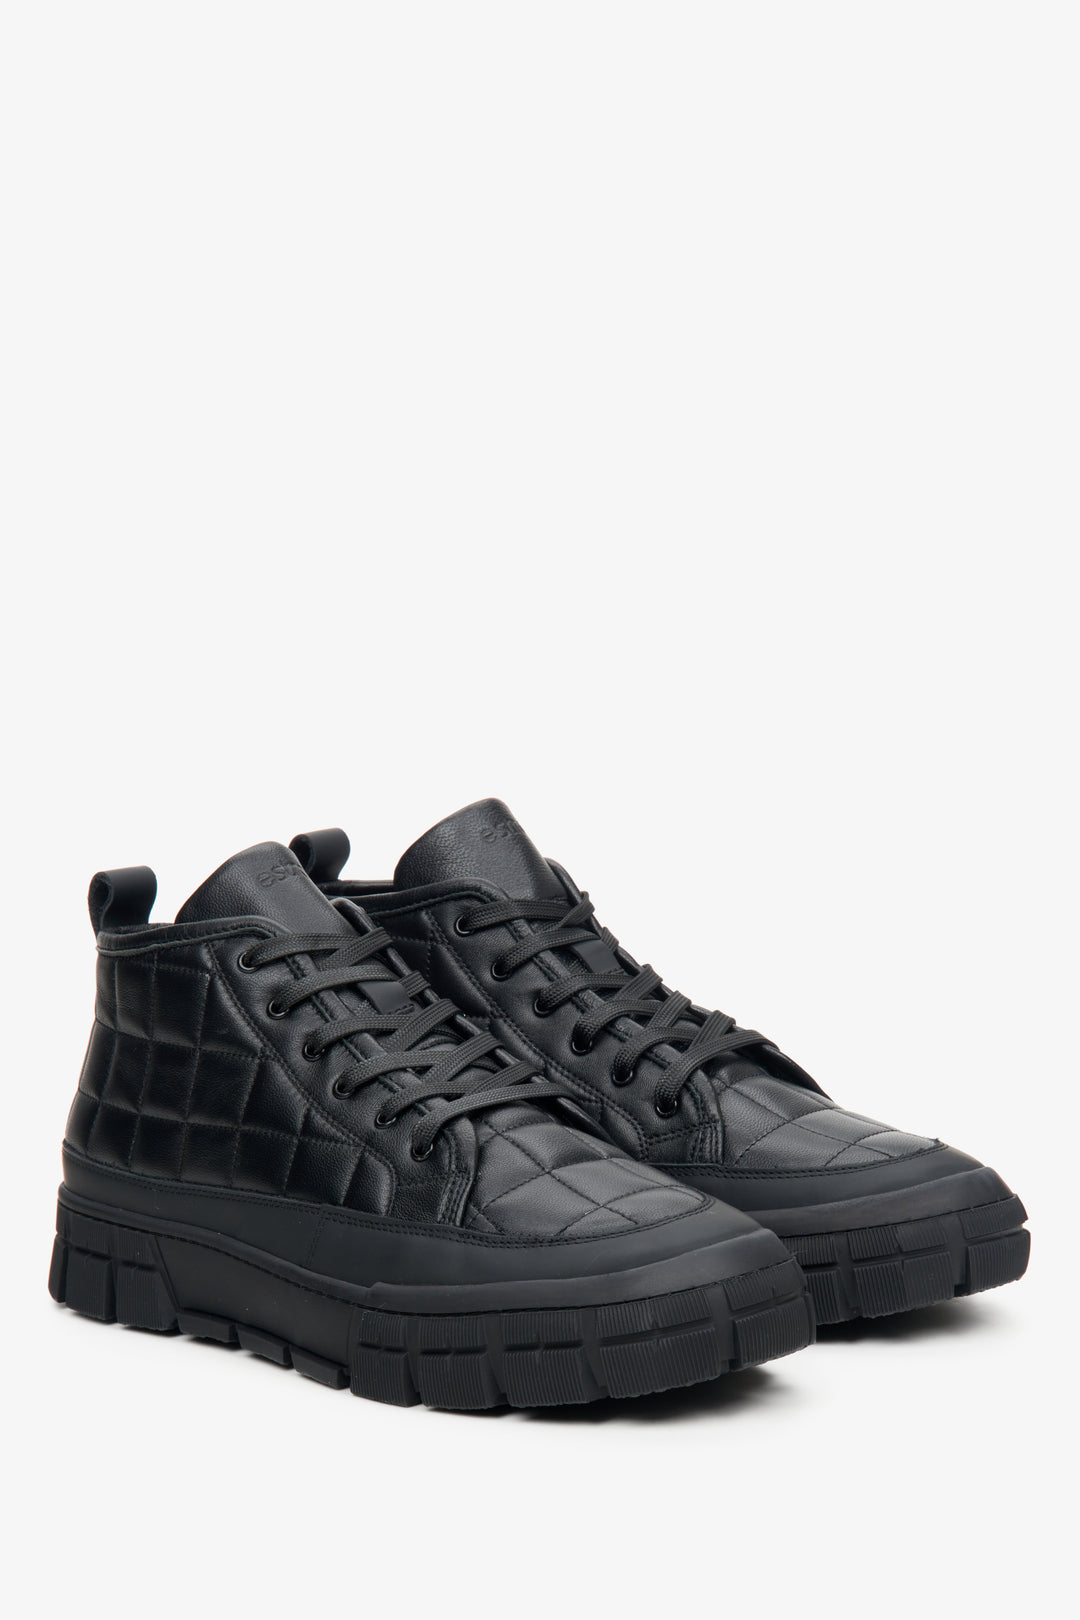 Men's black high-top sneakers with insulation made of genuine leather for winter.